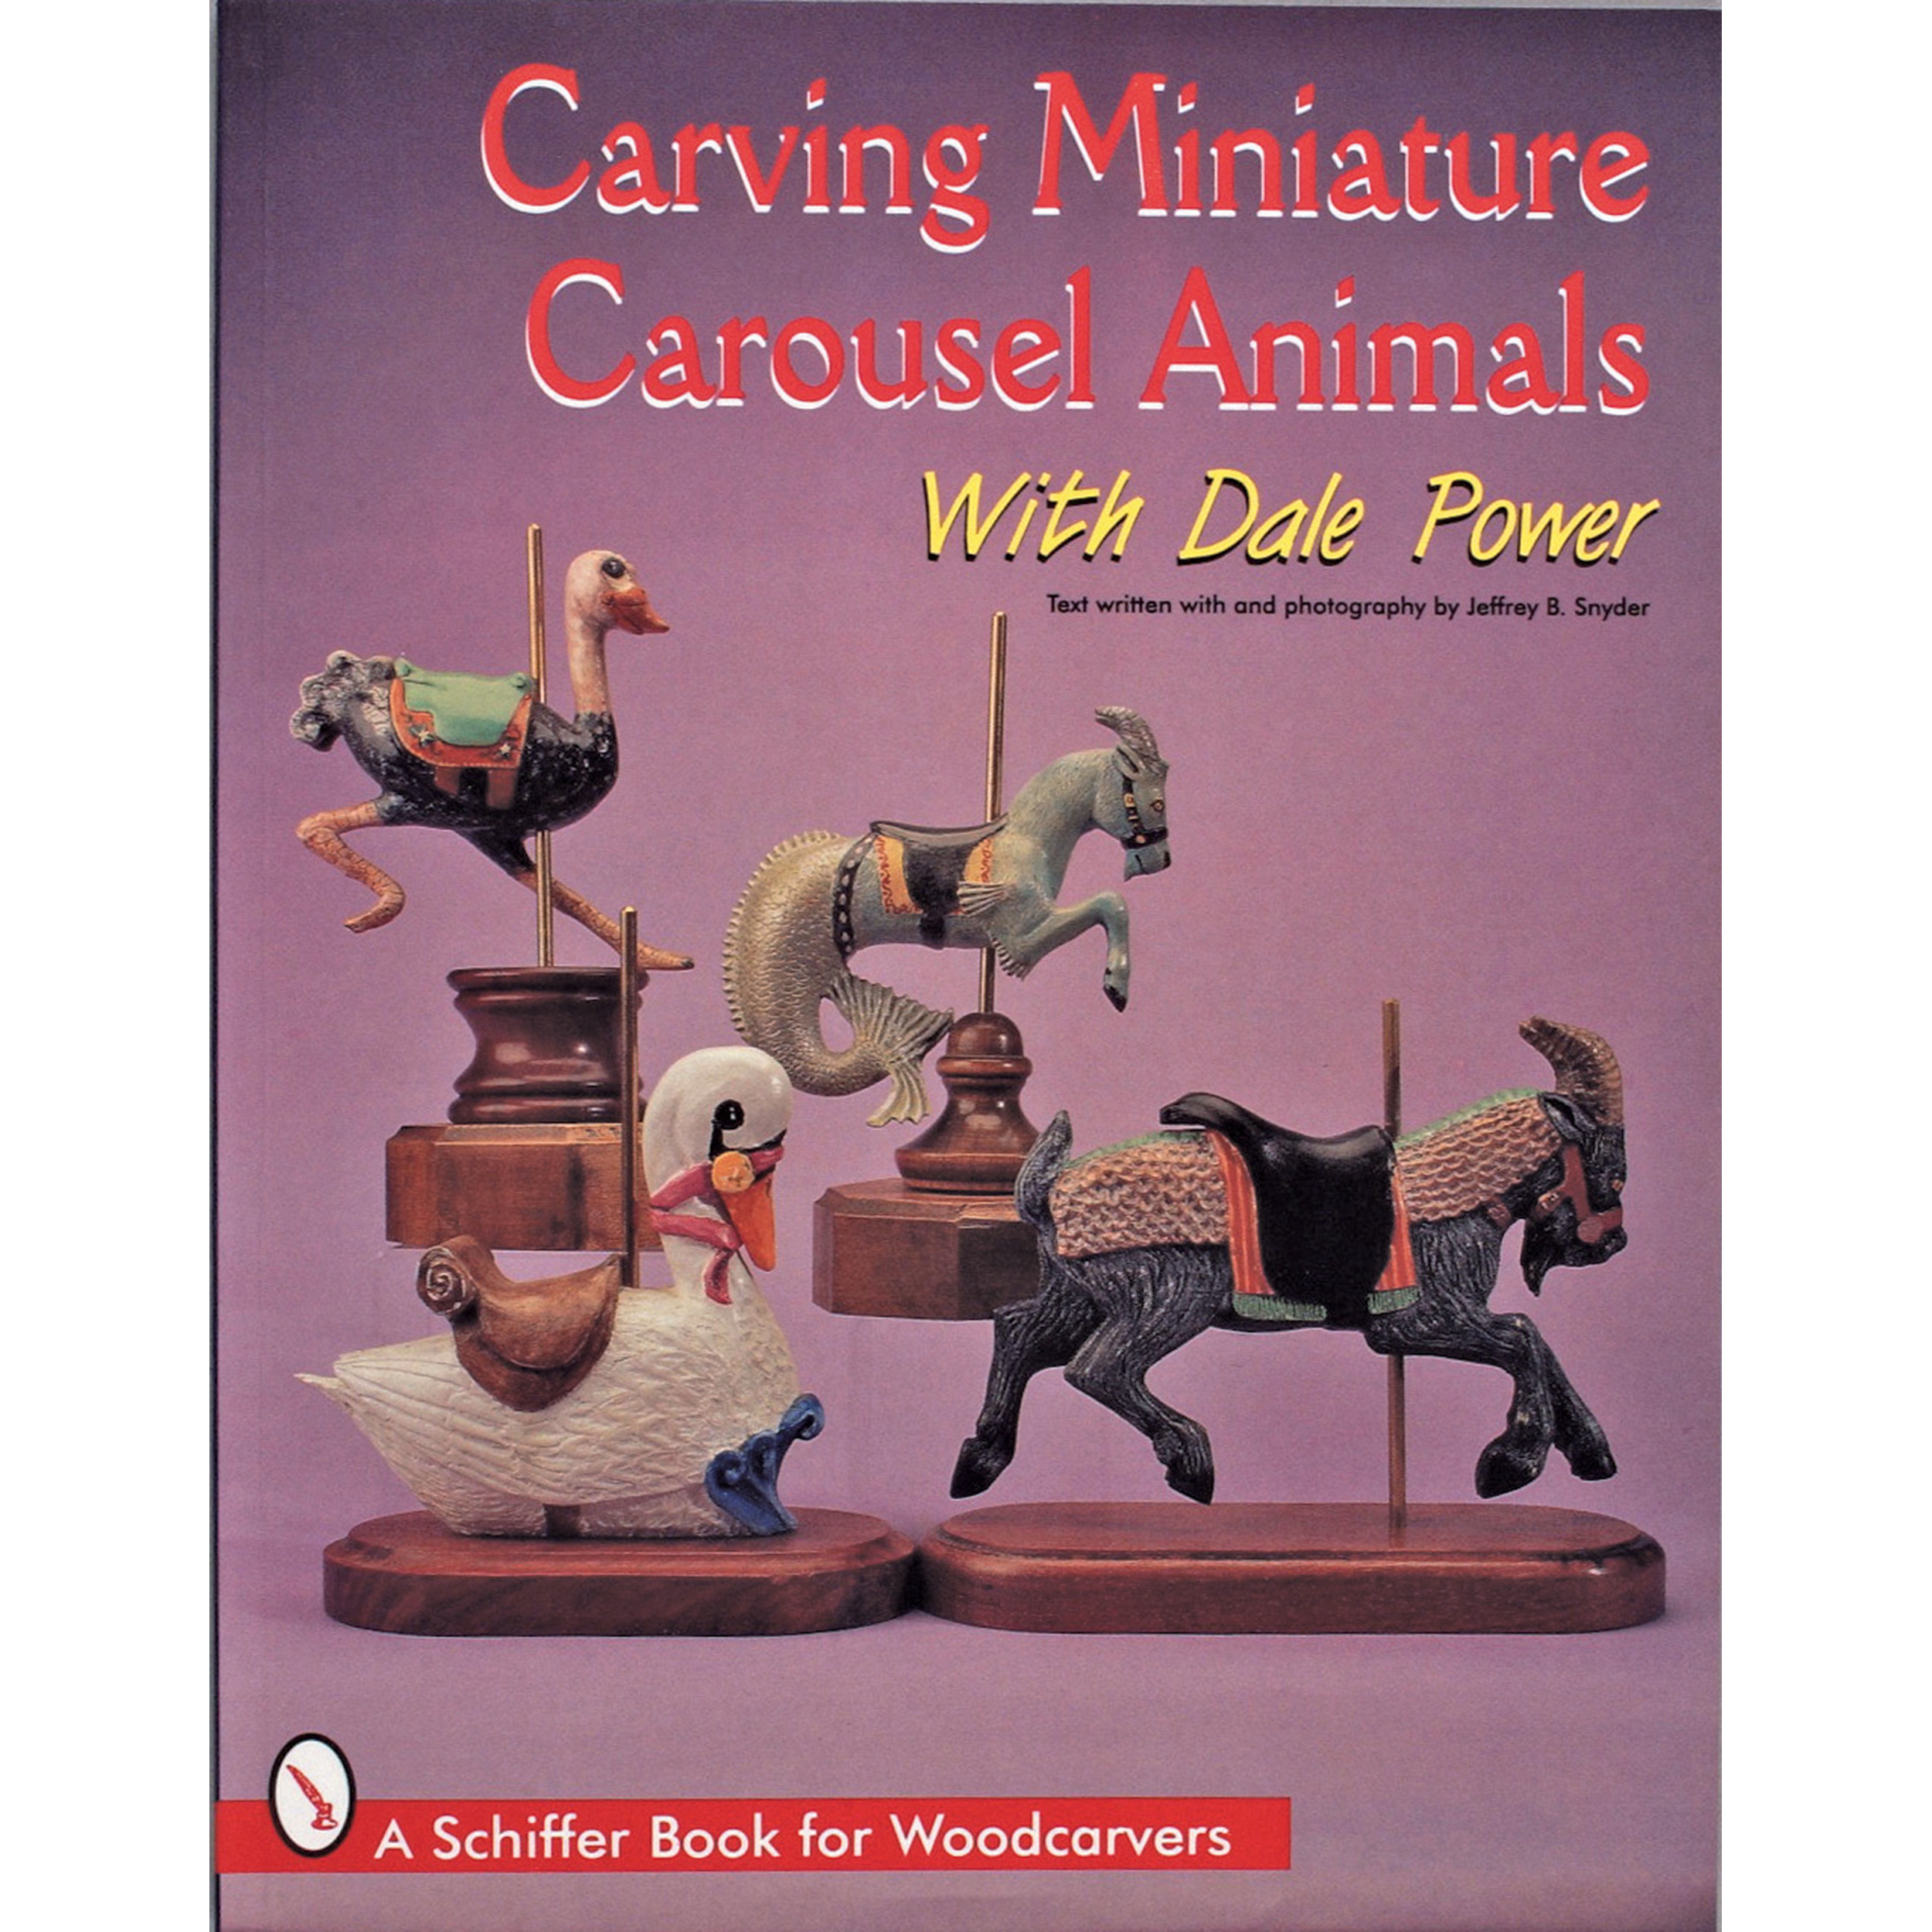 Carving Miniature Carousel Animals With Dale Power